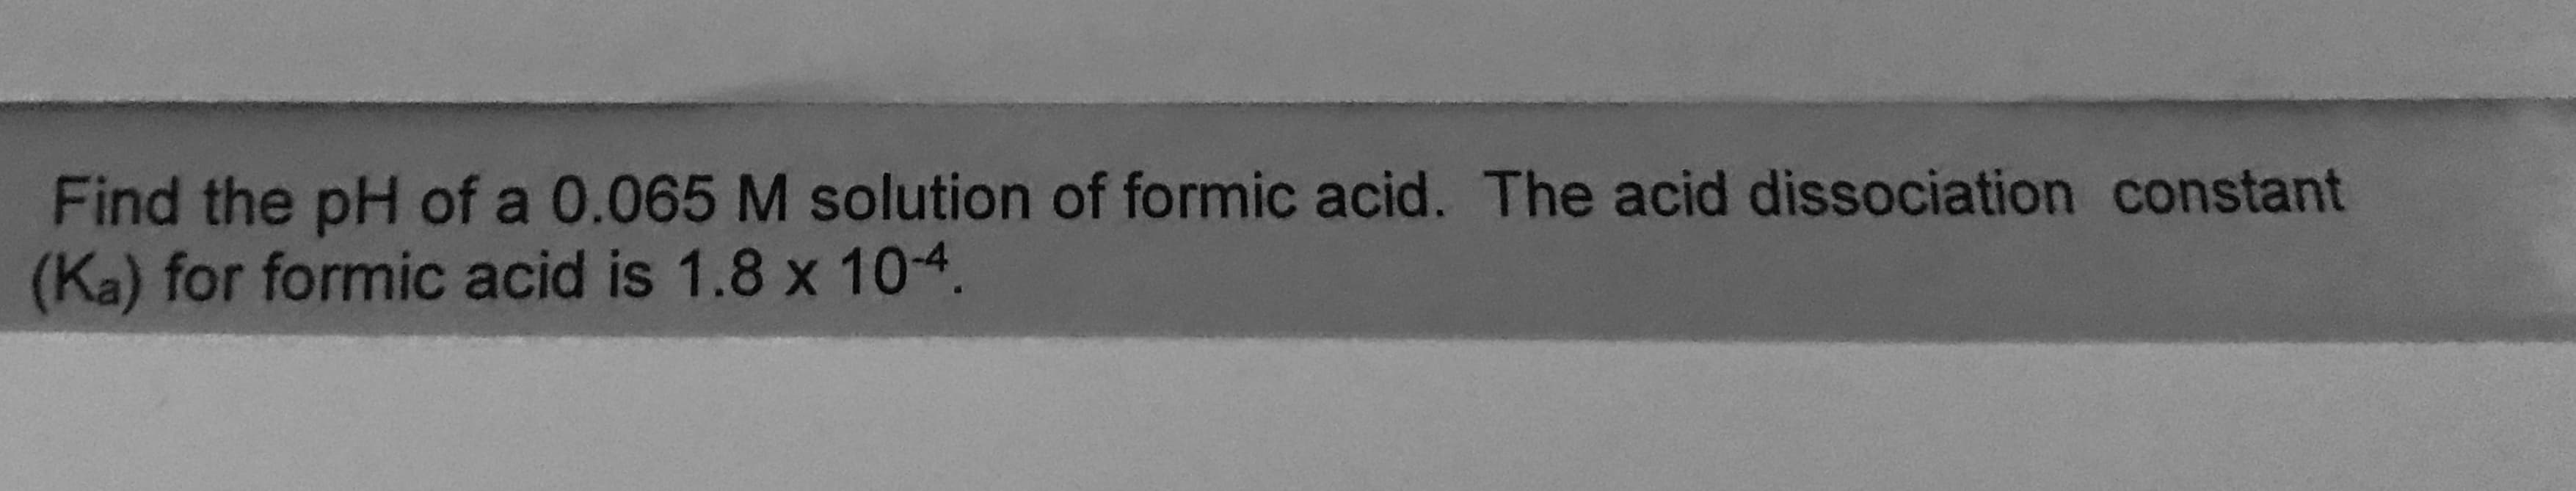 Find the pH of a 0.065 M solution of formic acid. The acid dissociation constant
(Ka) for formic acid is 1.8 x 104.
